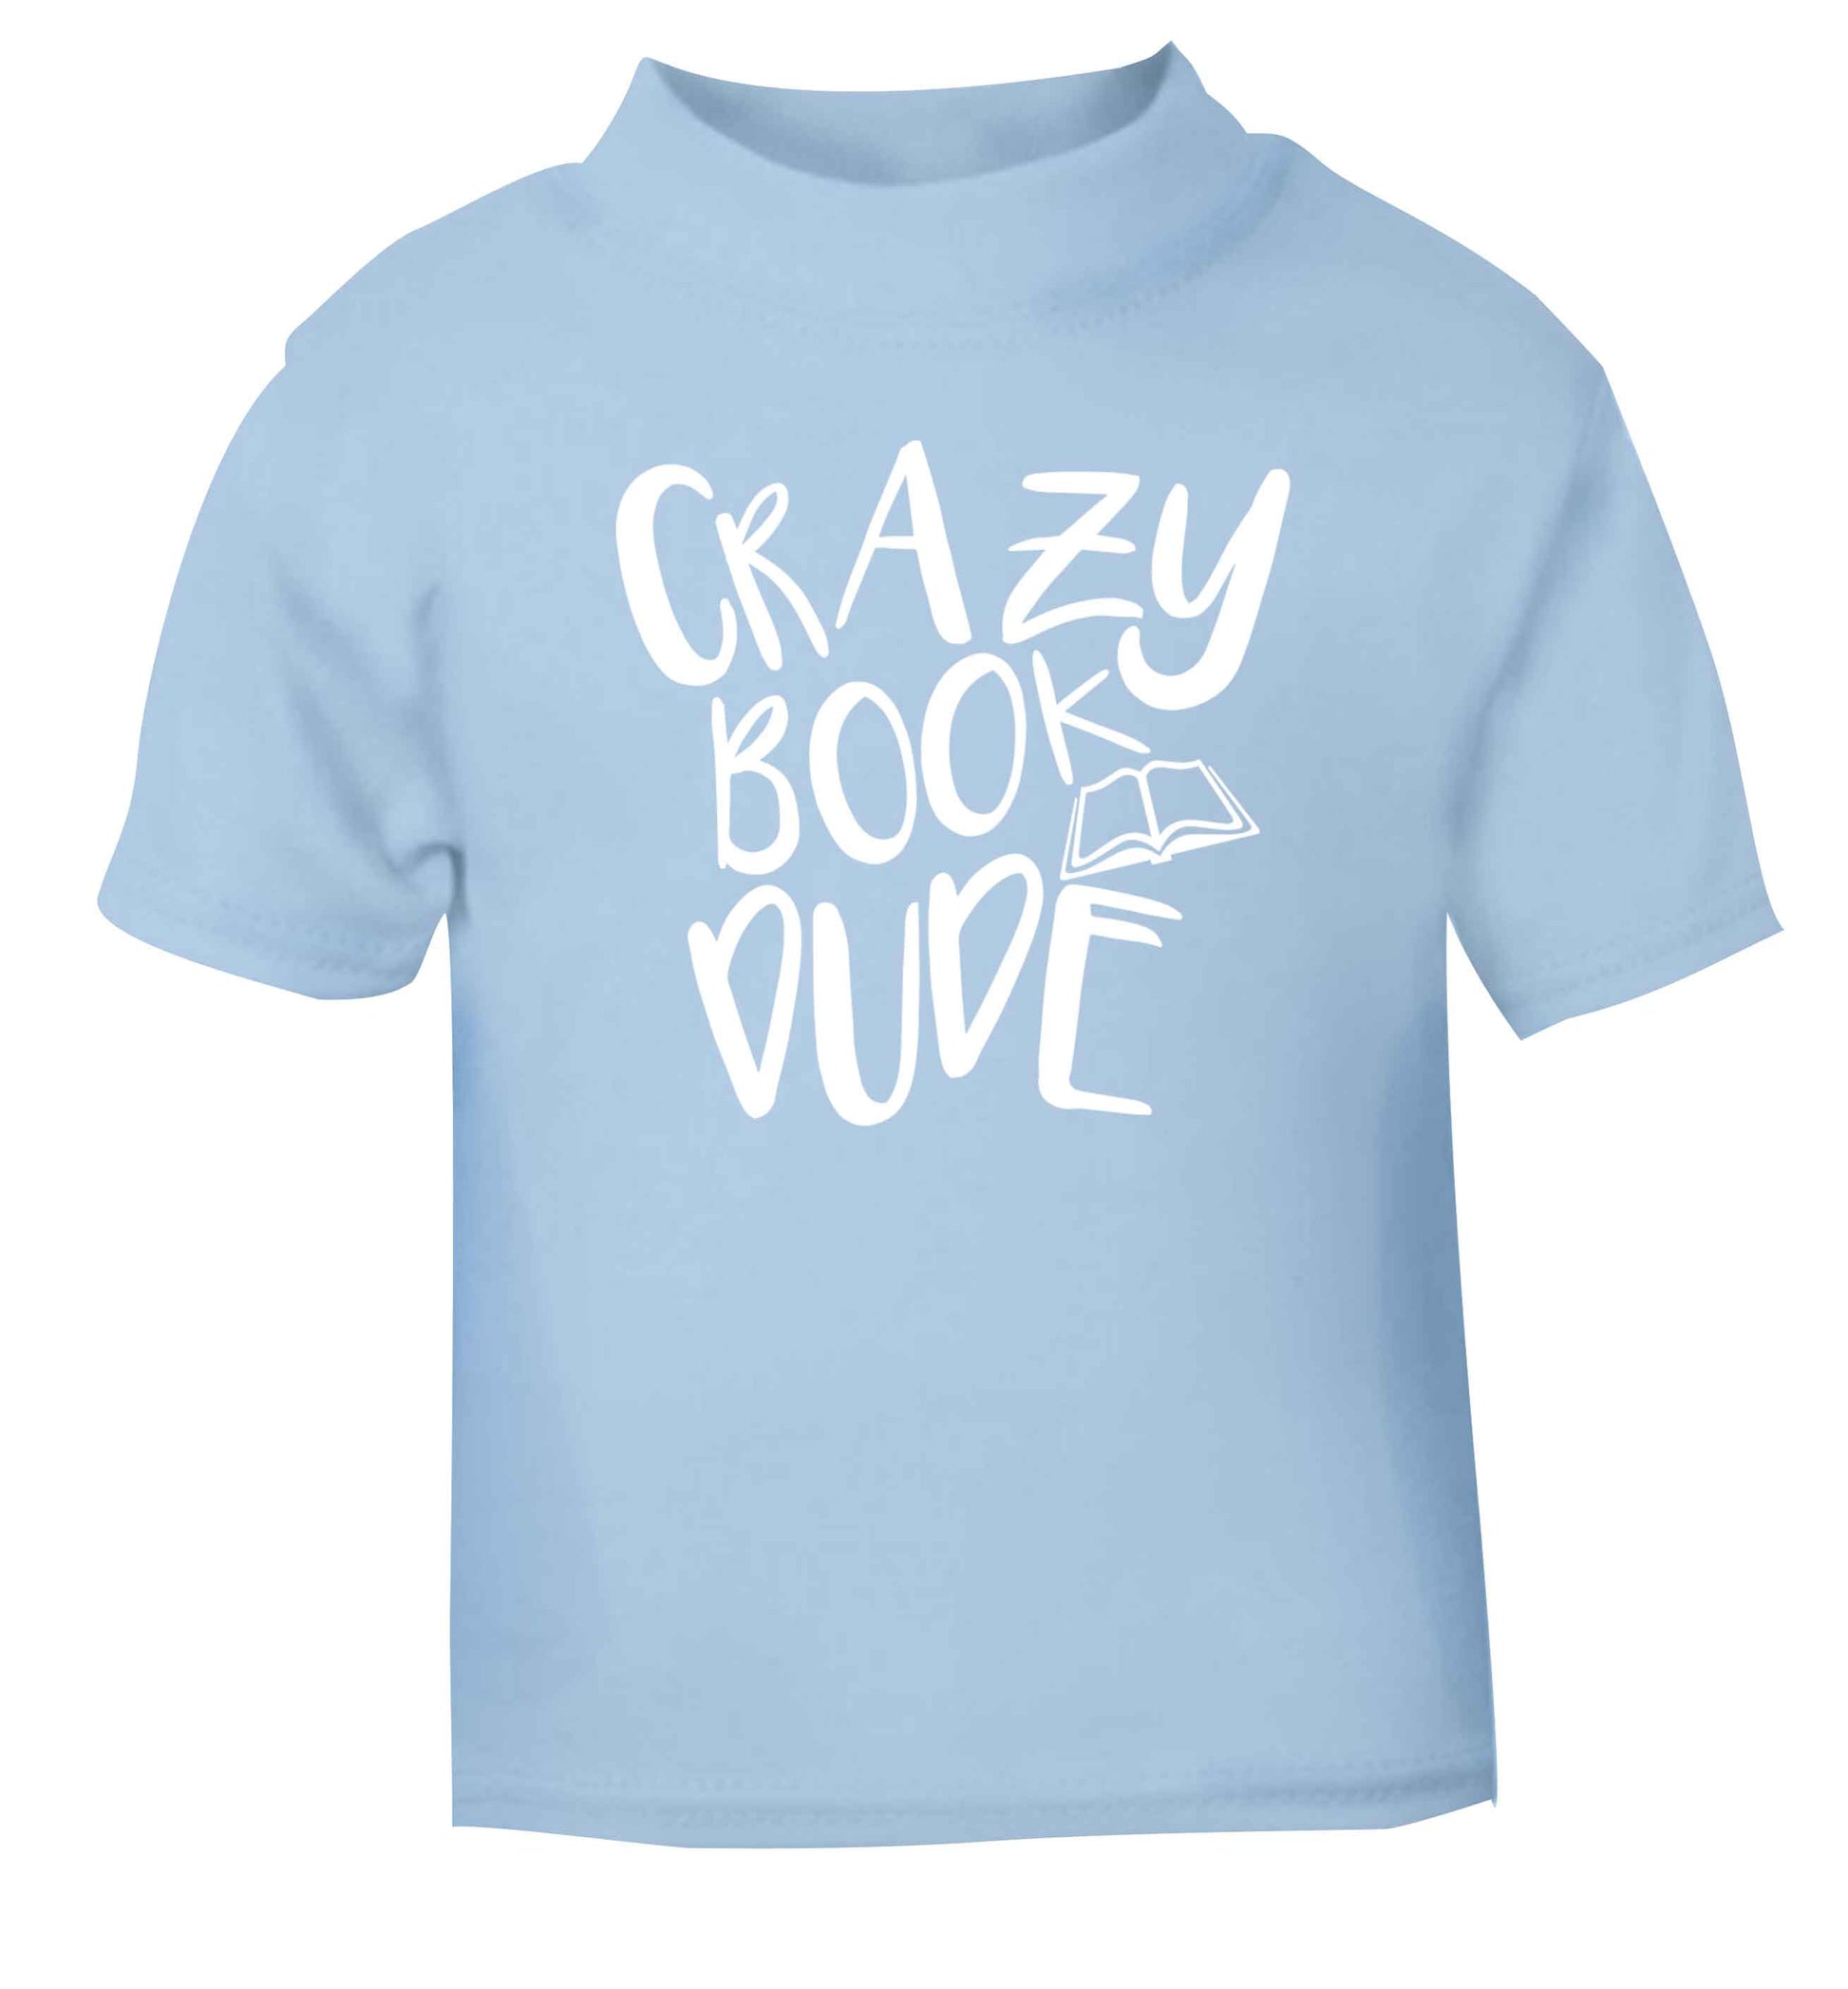 Crazy book dude light blue Baby Toddler Tshirt 2 Years